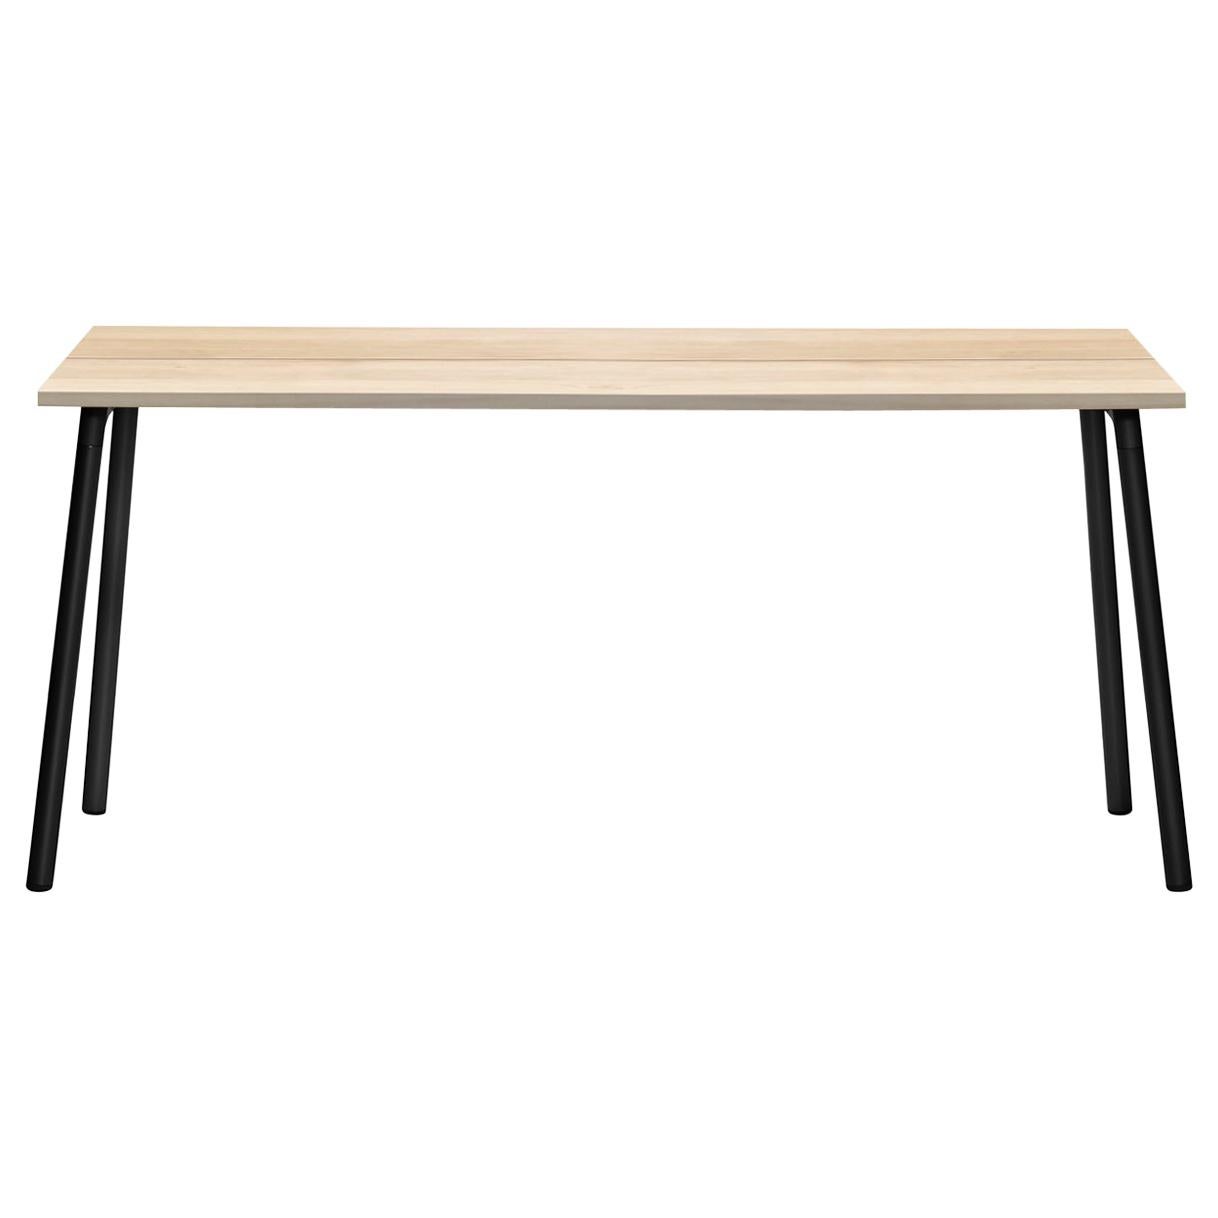 Emeco Run 62" Side Table with Black Frame & Wood Top by Sam Hecht and Kim Colin For Sale